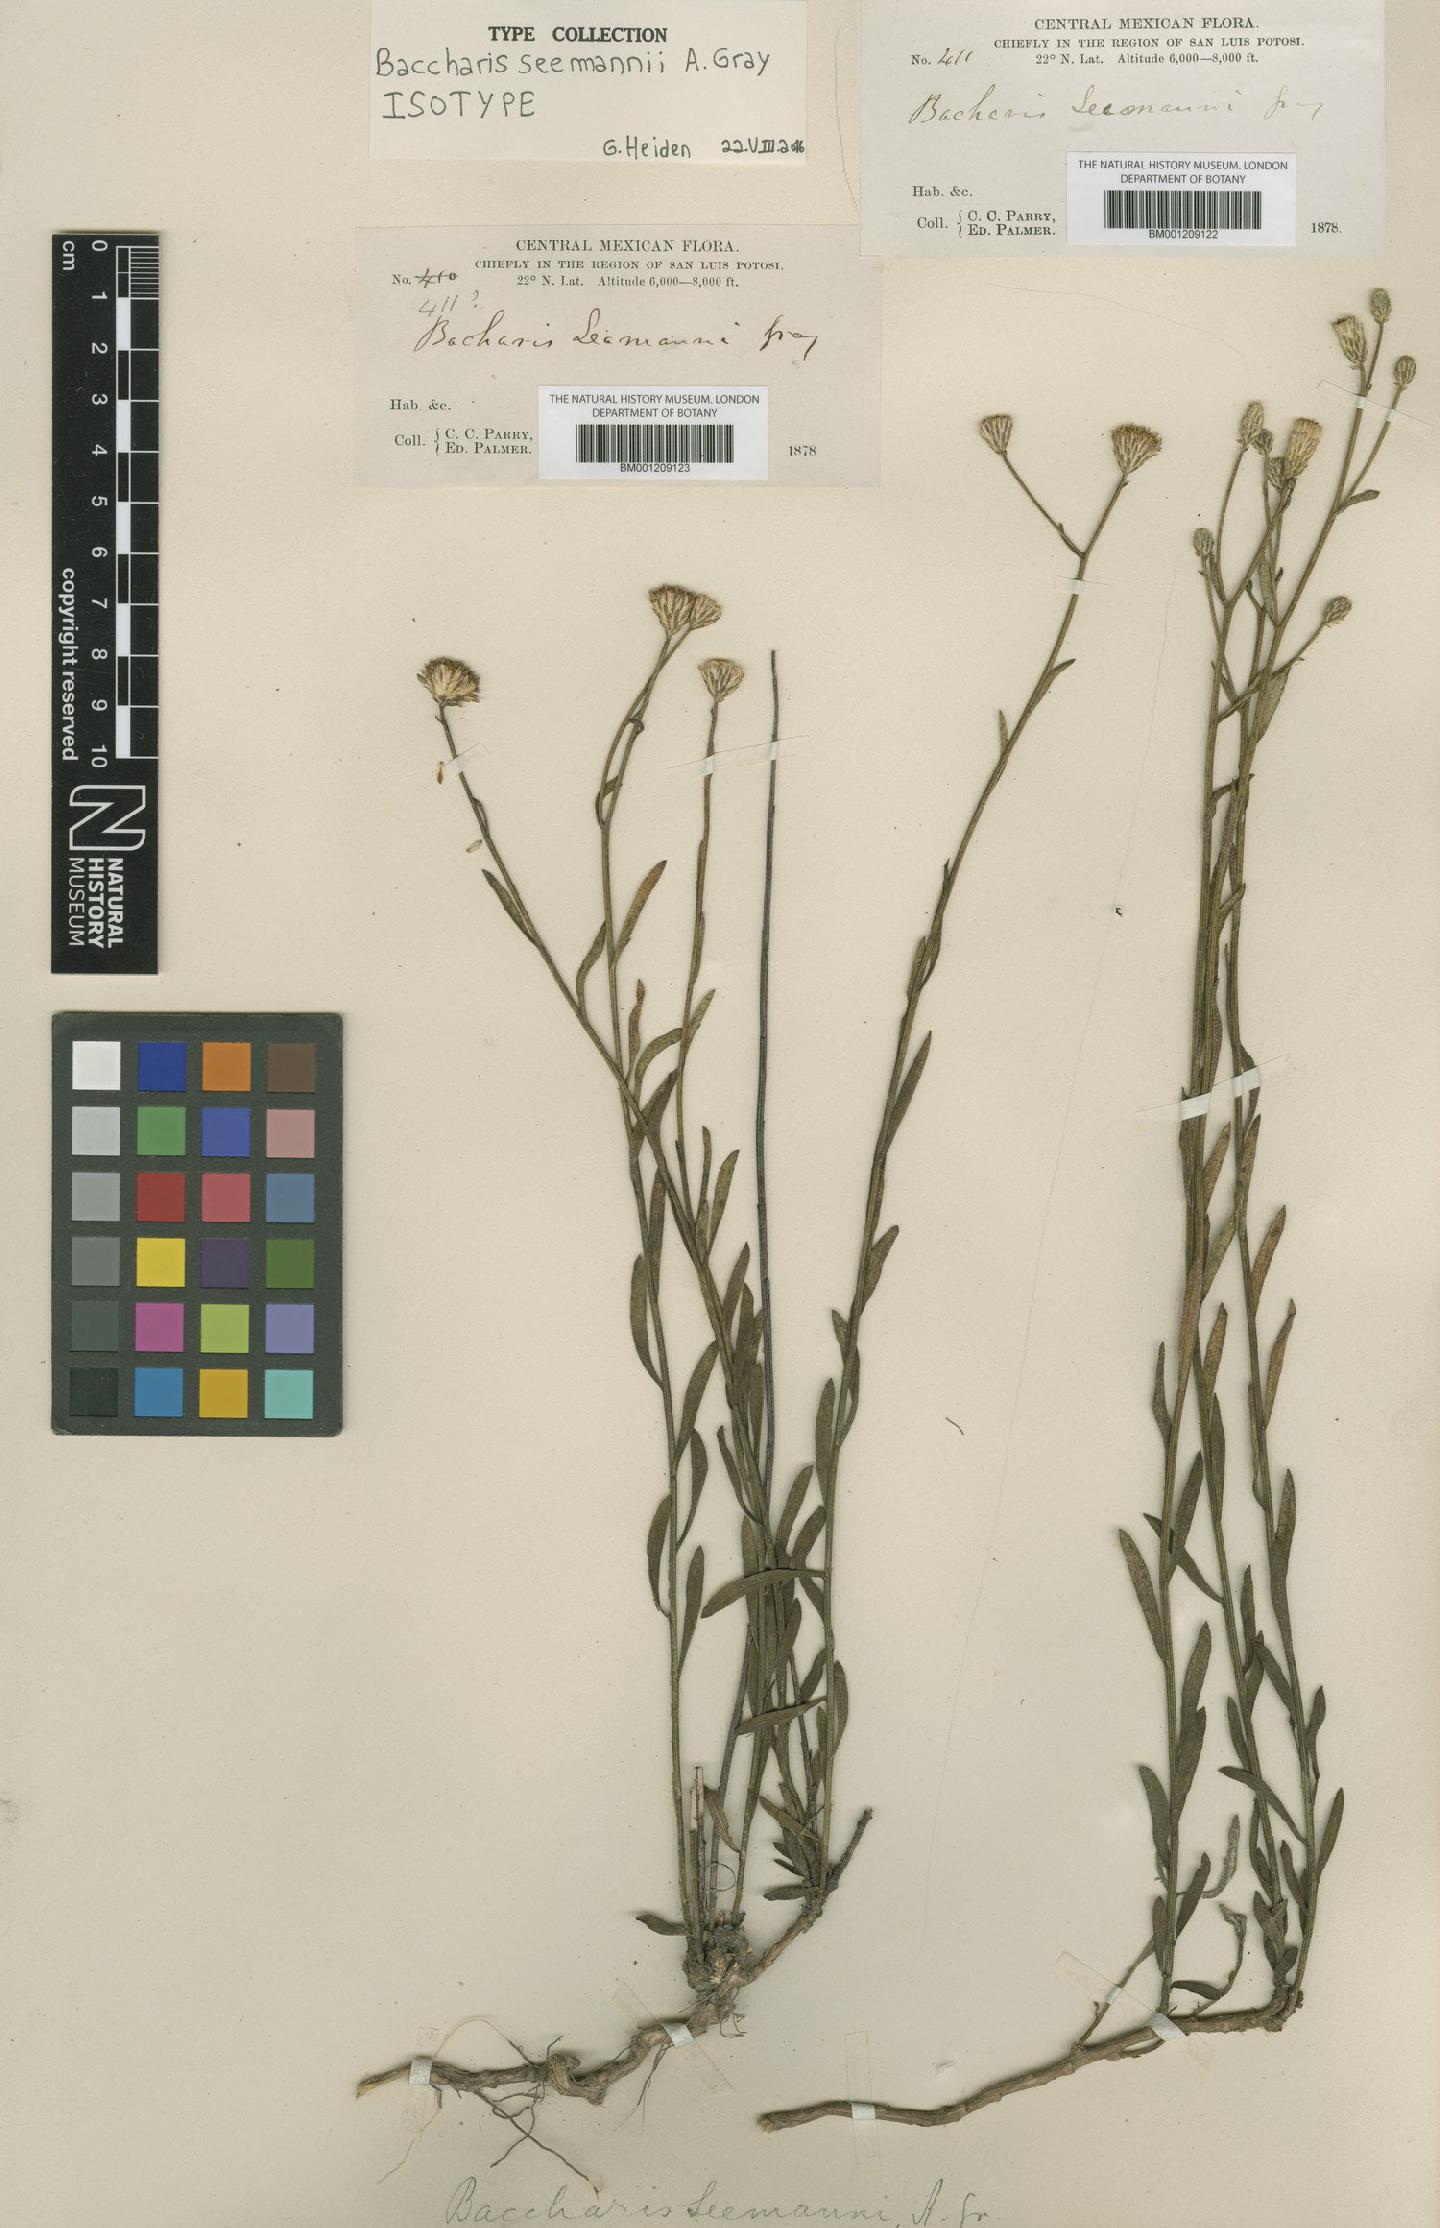 To NHMUK collection (Baccharis seemannii A.Gray; Isotype; NHMUK:ecatalogue:6730098)